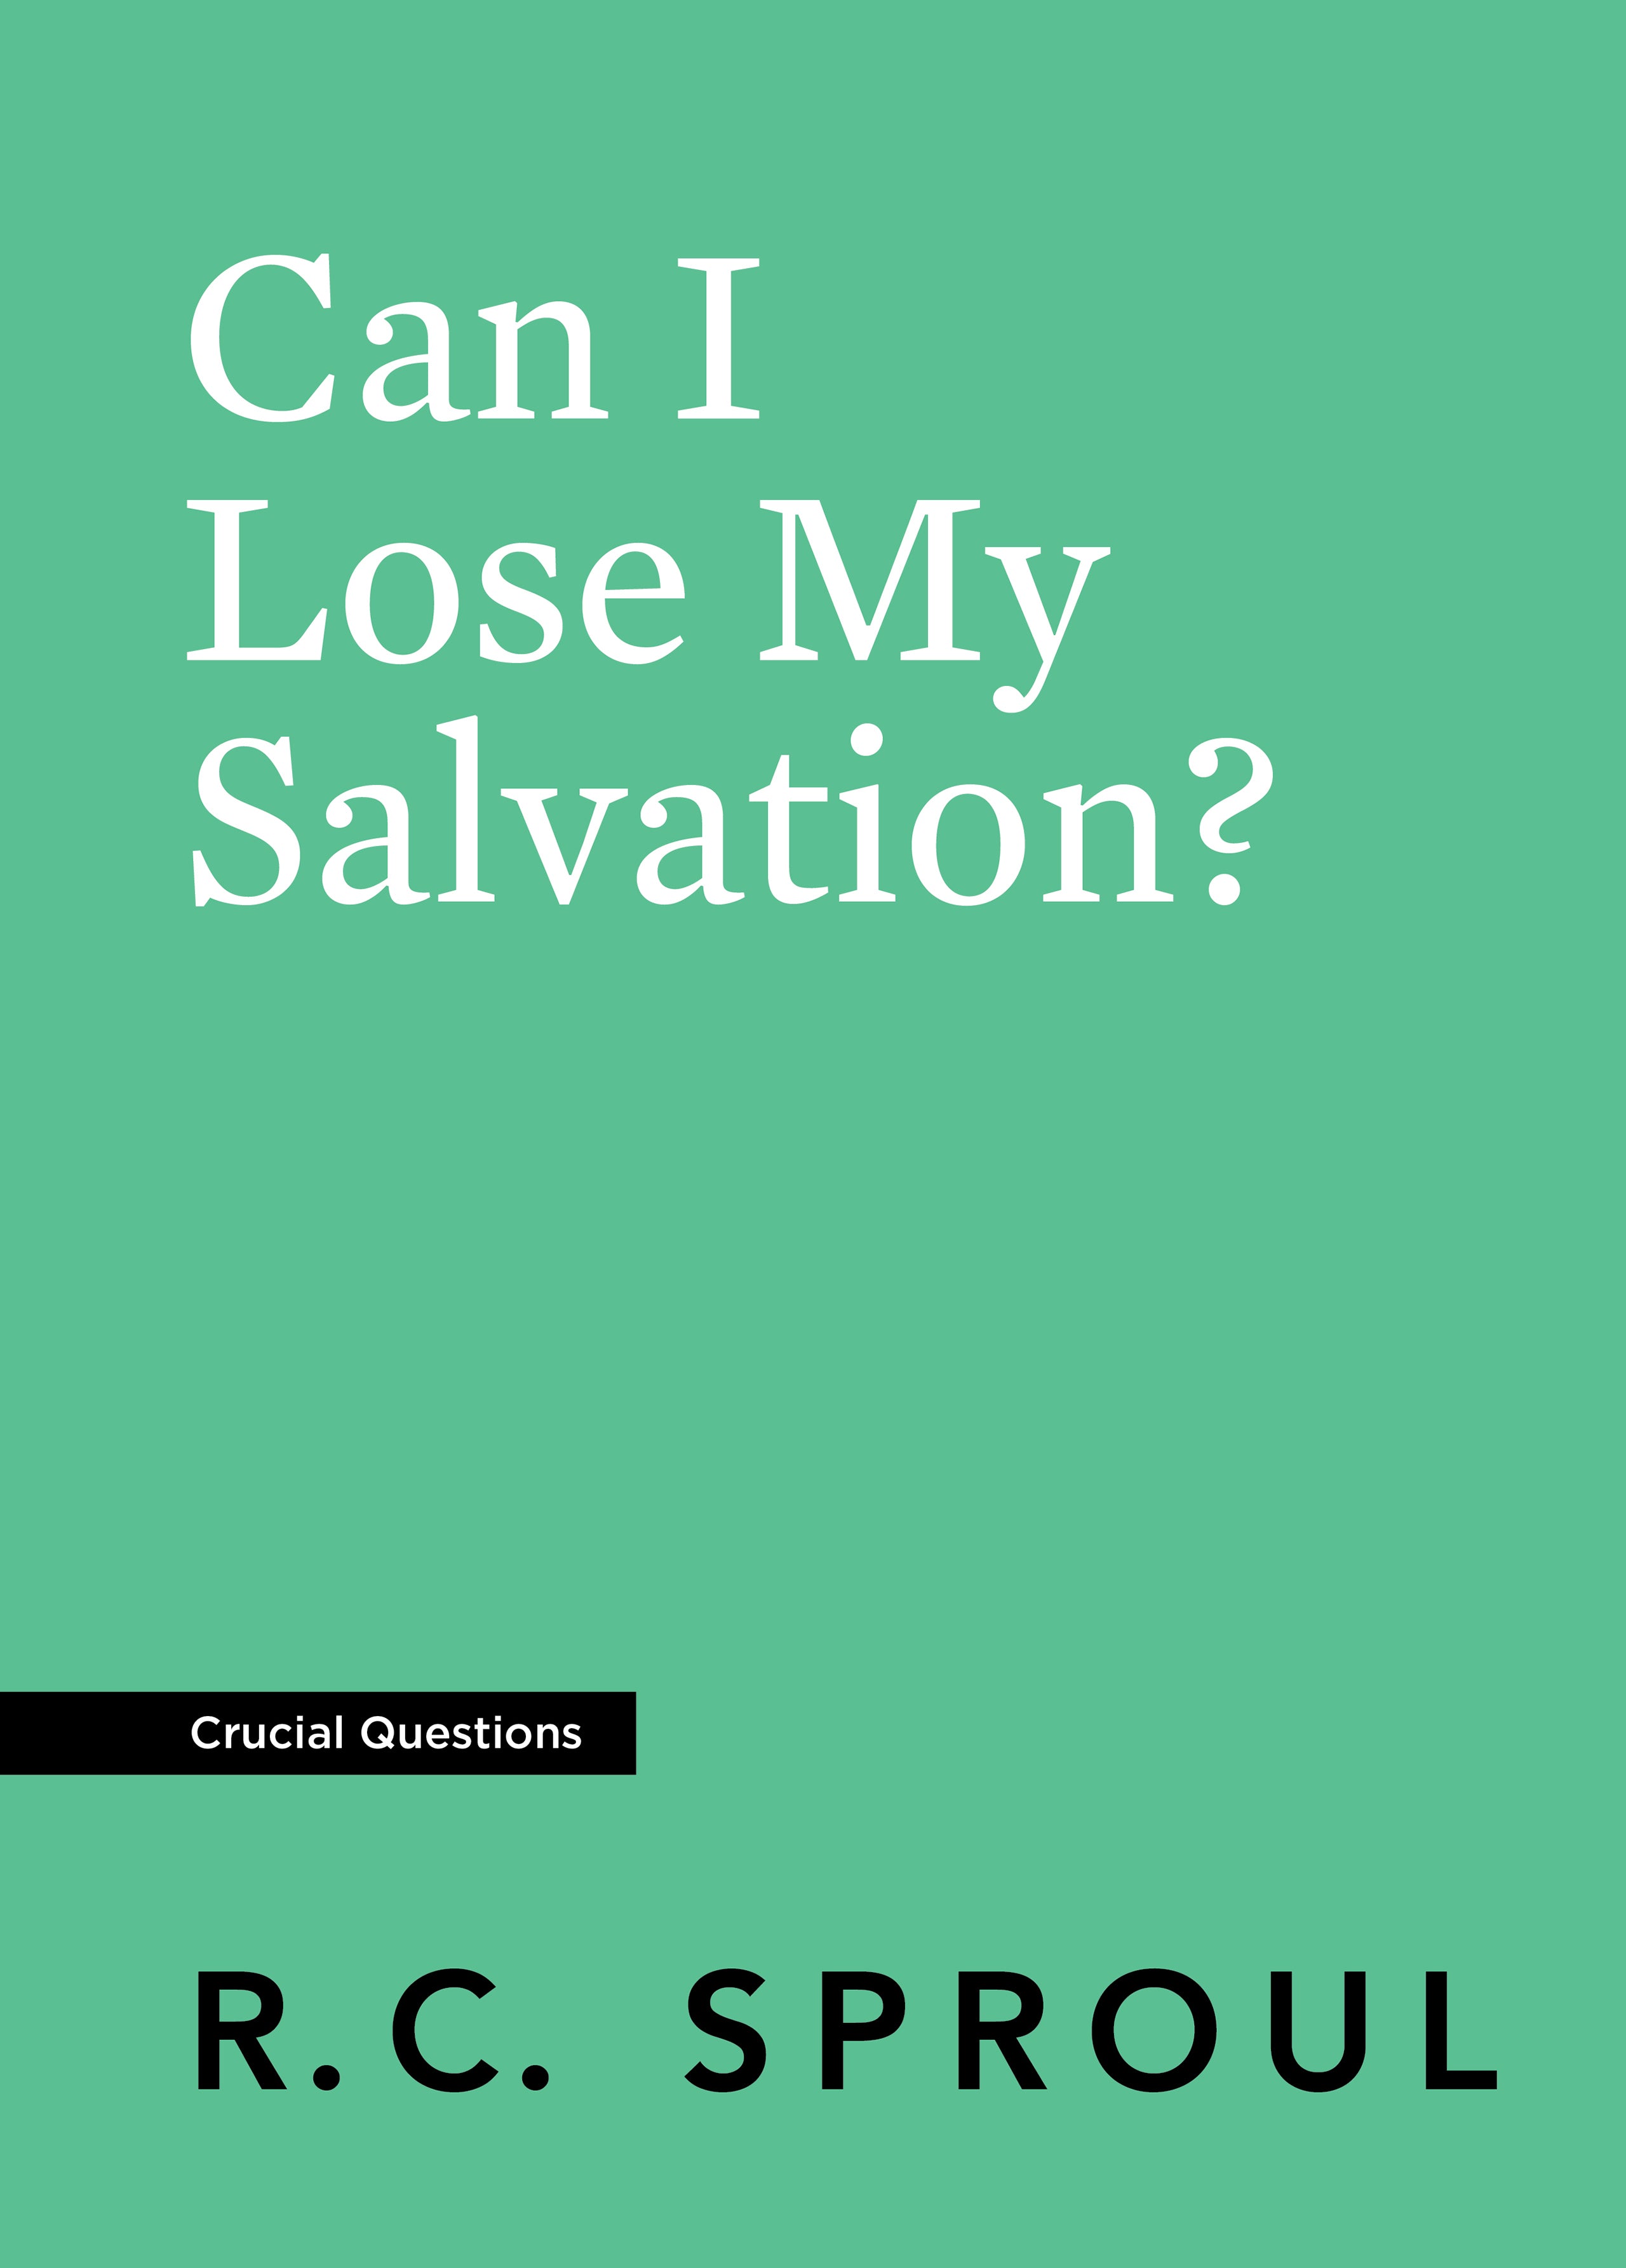 Image of Can I Lose My Salvation? other